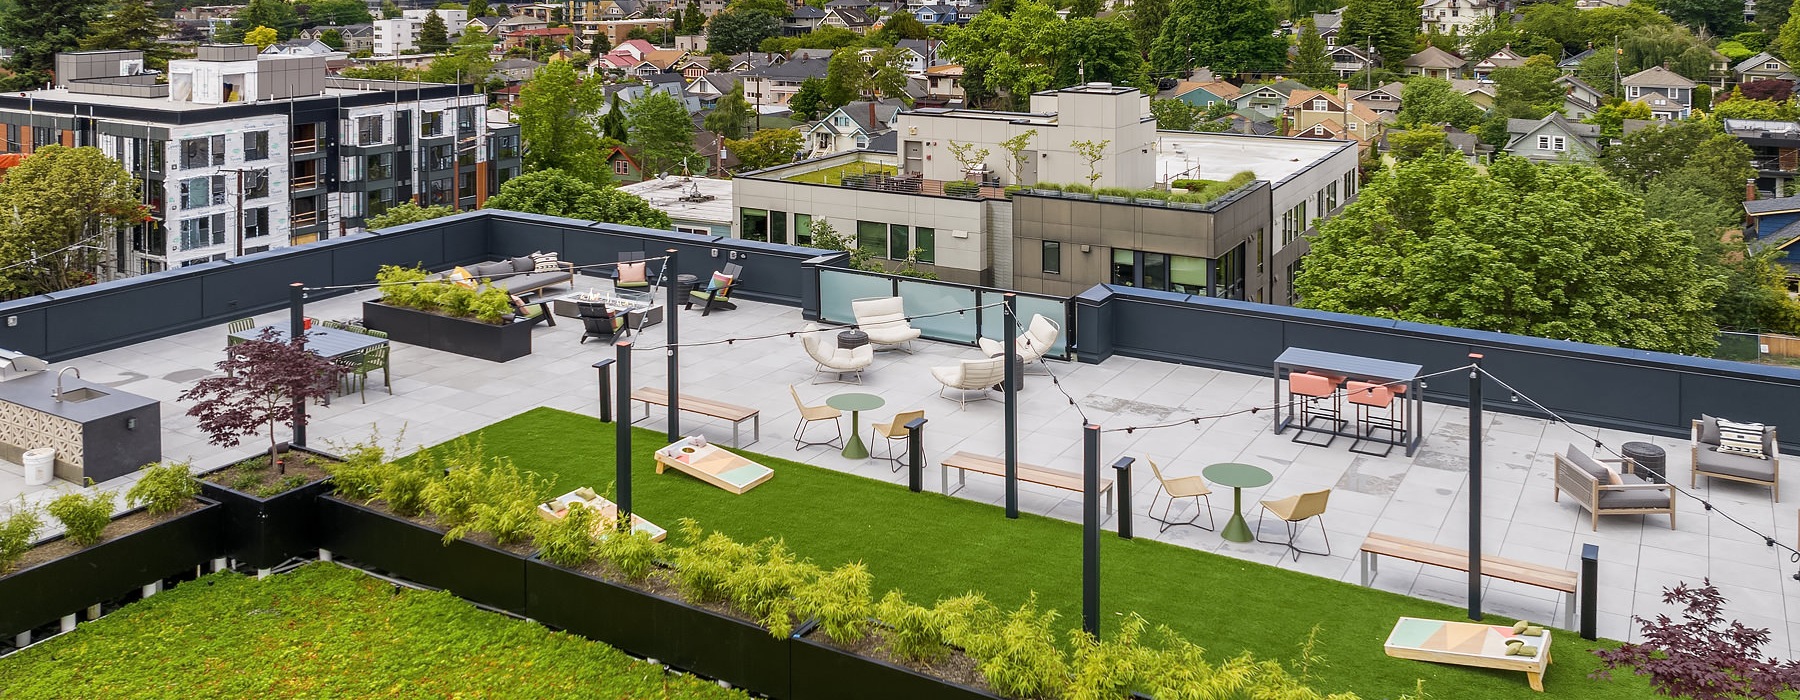 Aerial View of Rooftop with Seating, Green Space and BBQ